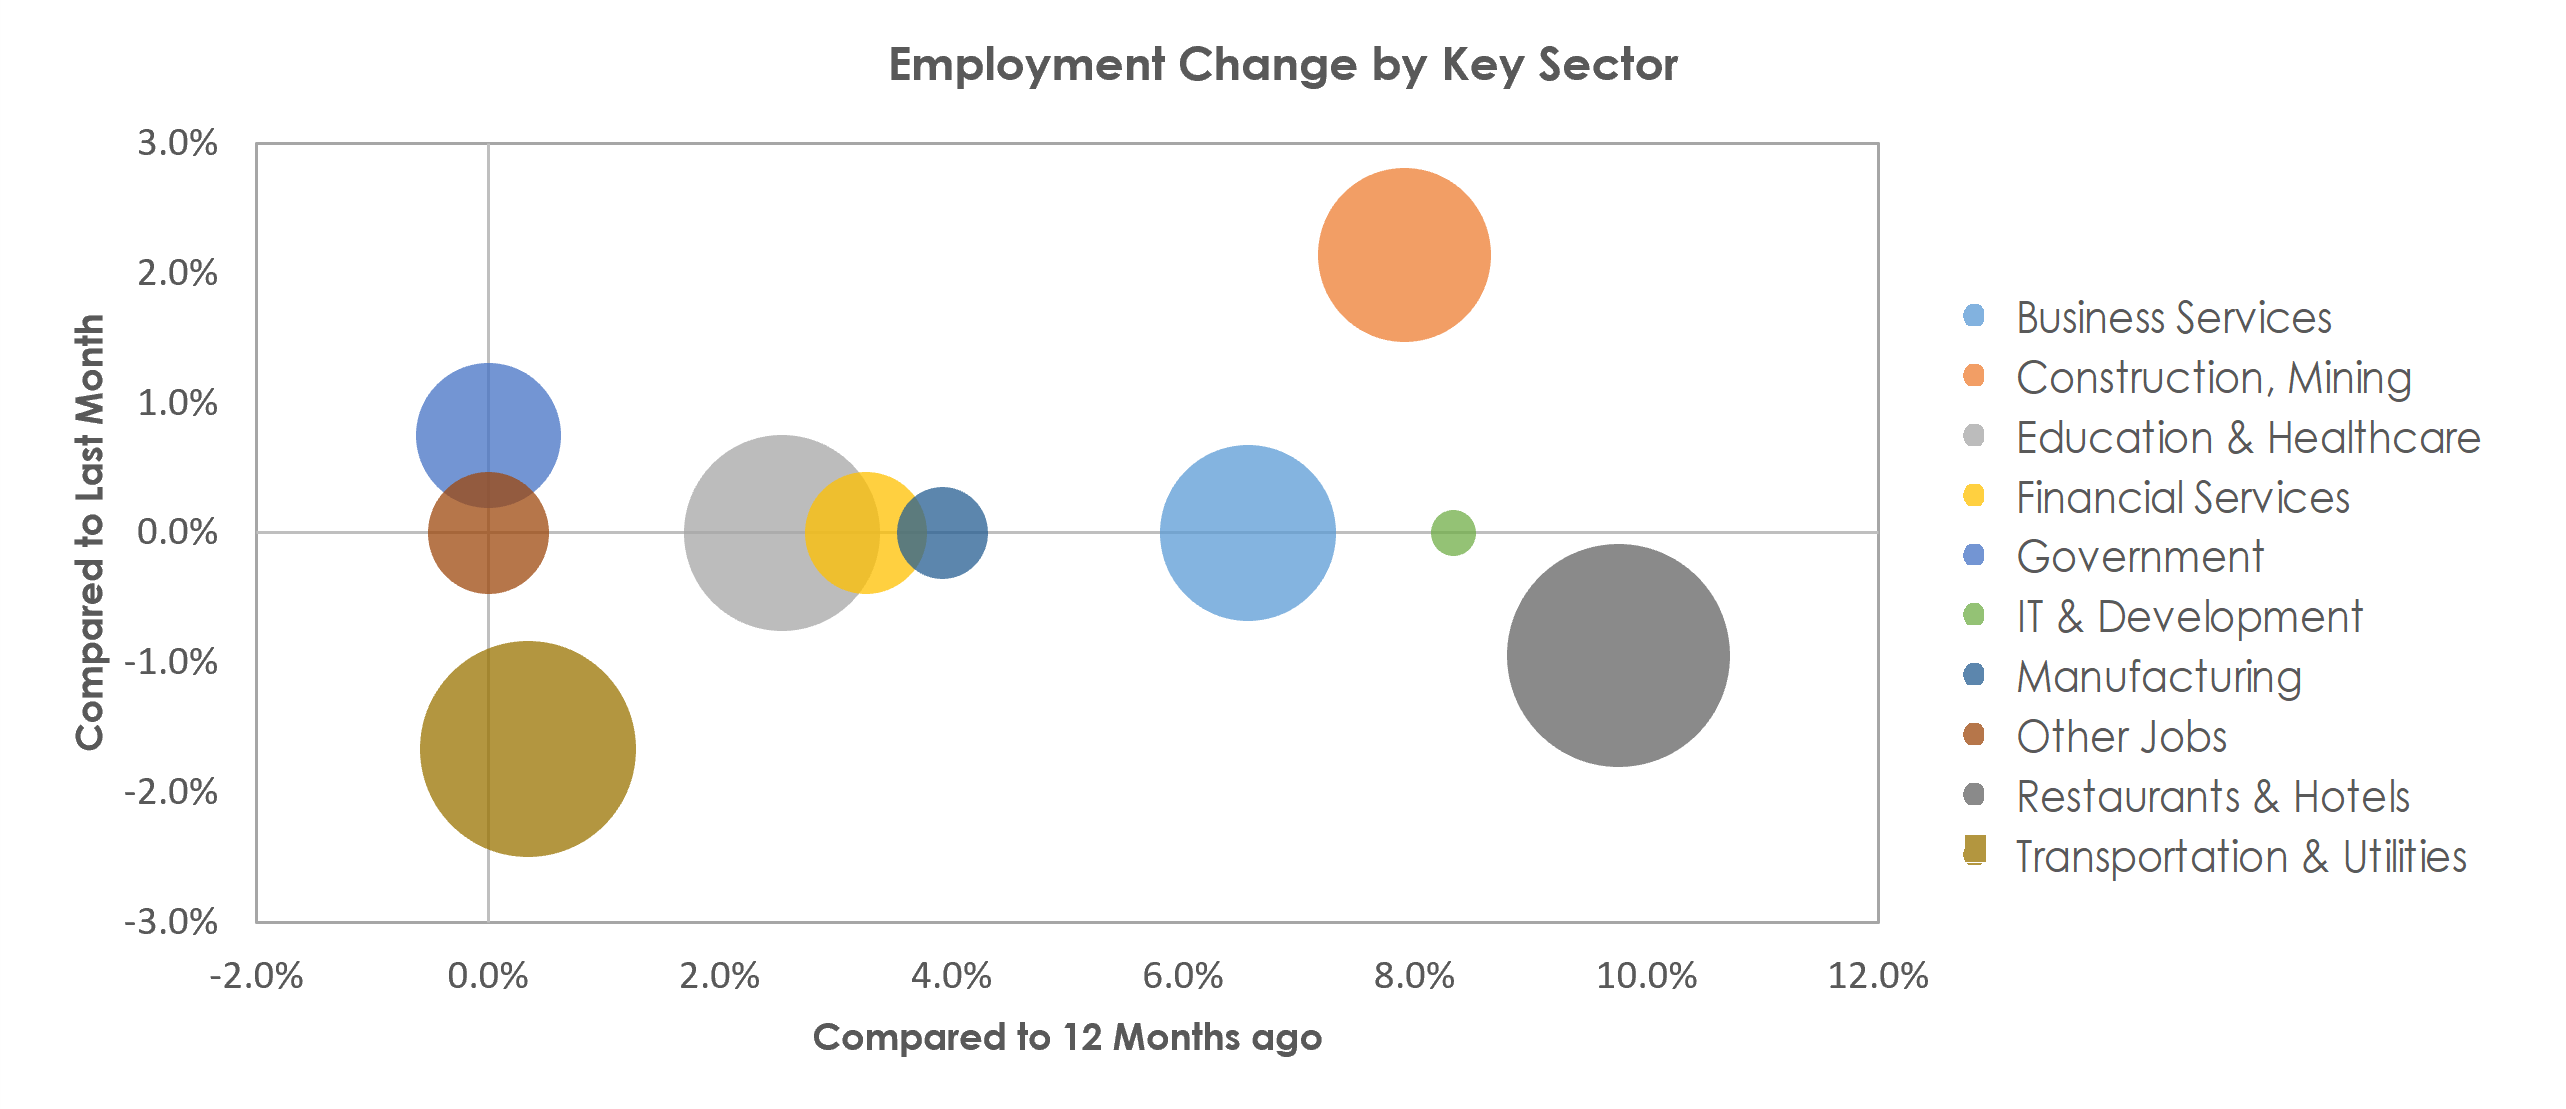 Naples-Immokalee-Marco Island, FL Unemployment by Industry March 2022